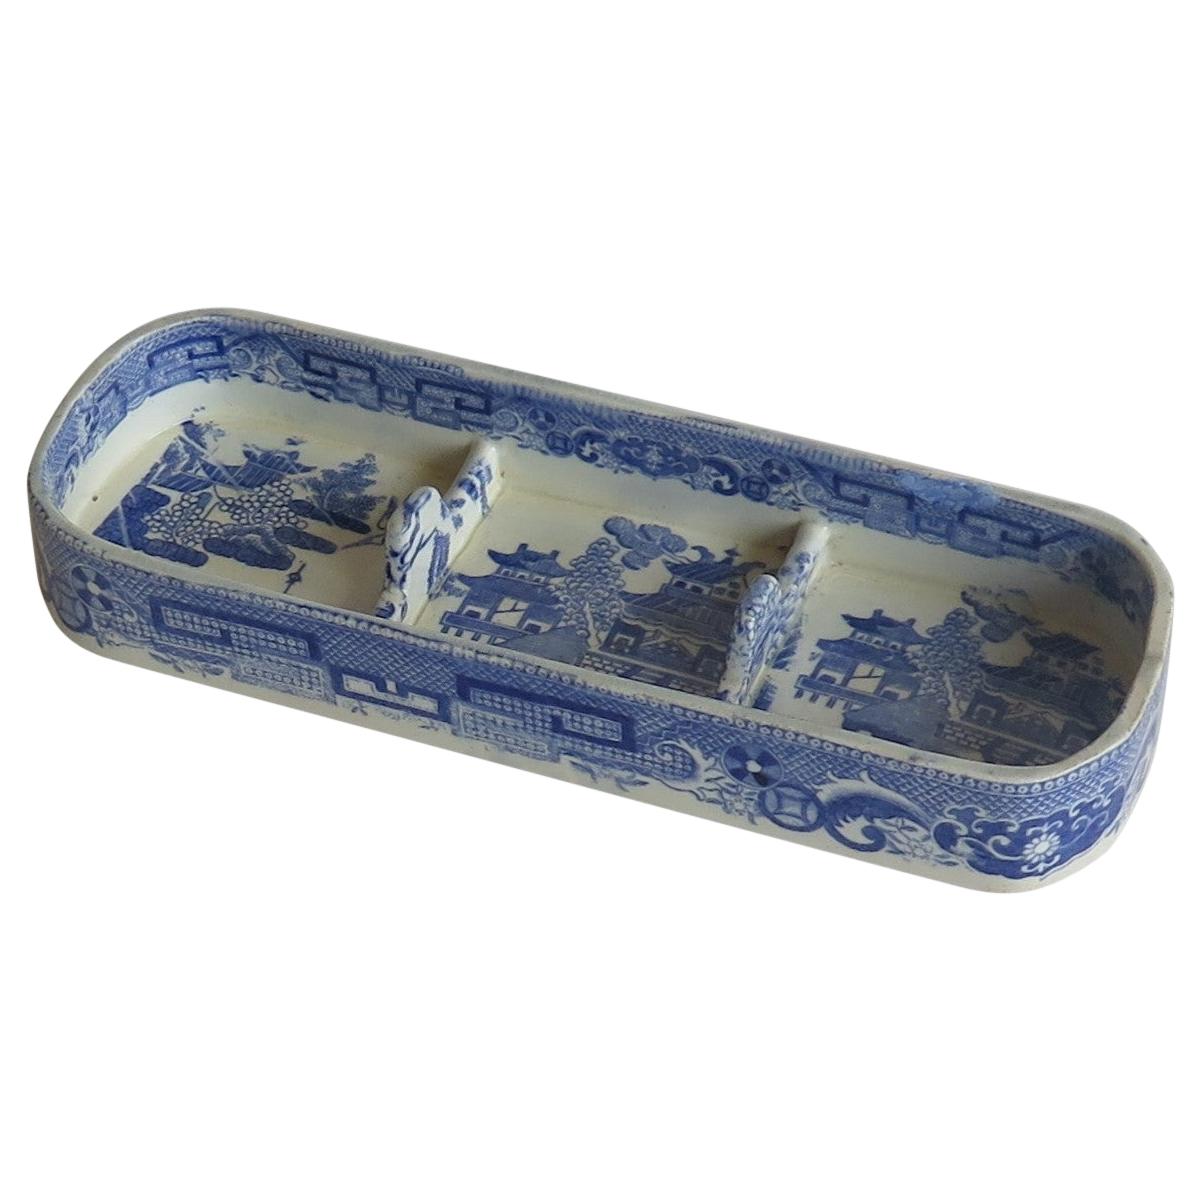 Rare Early Spode Pen Tray Pearlware Blue and White Willow Pattern, circa 1800